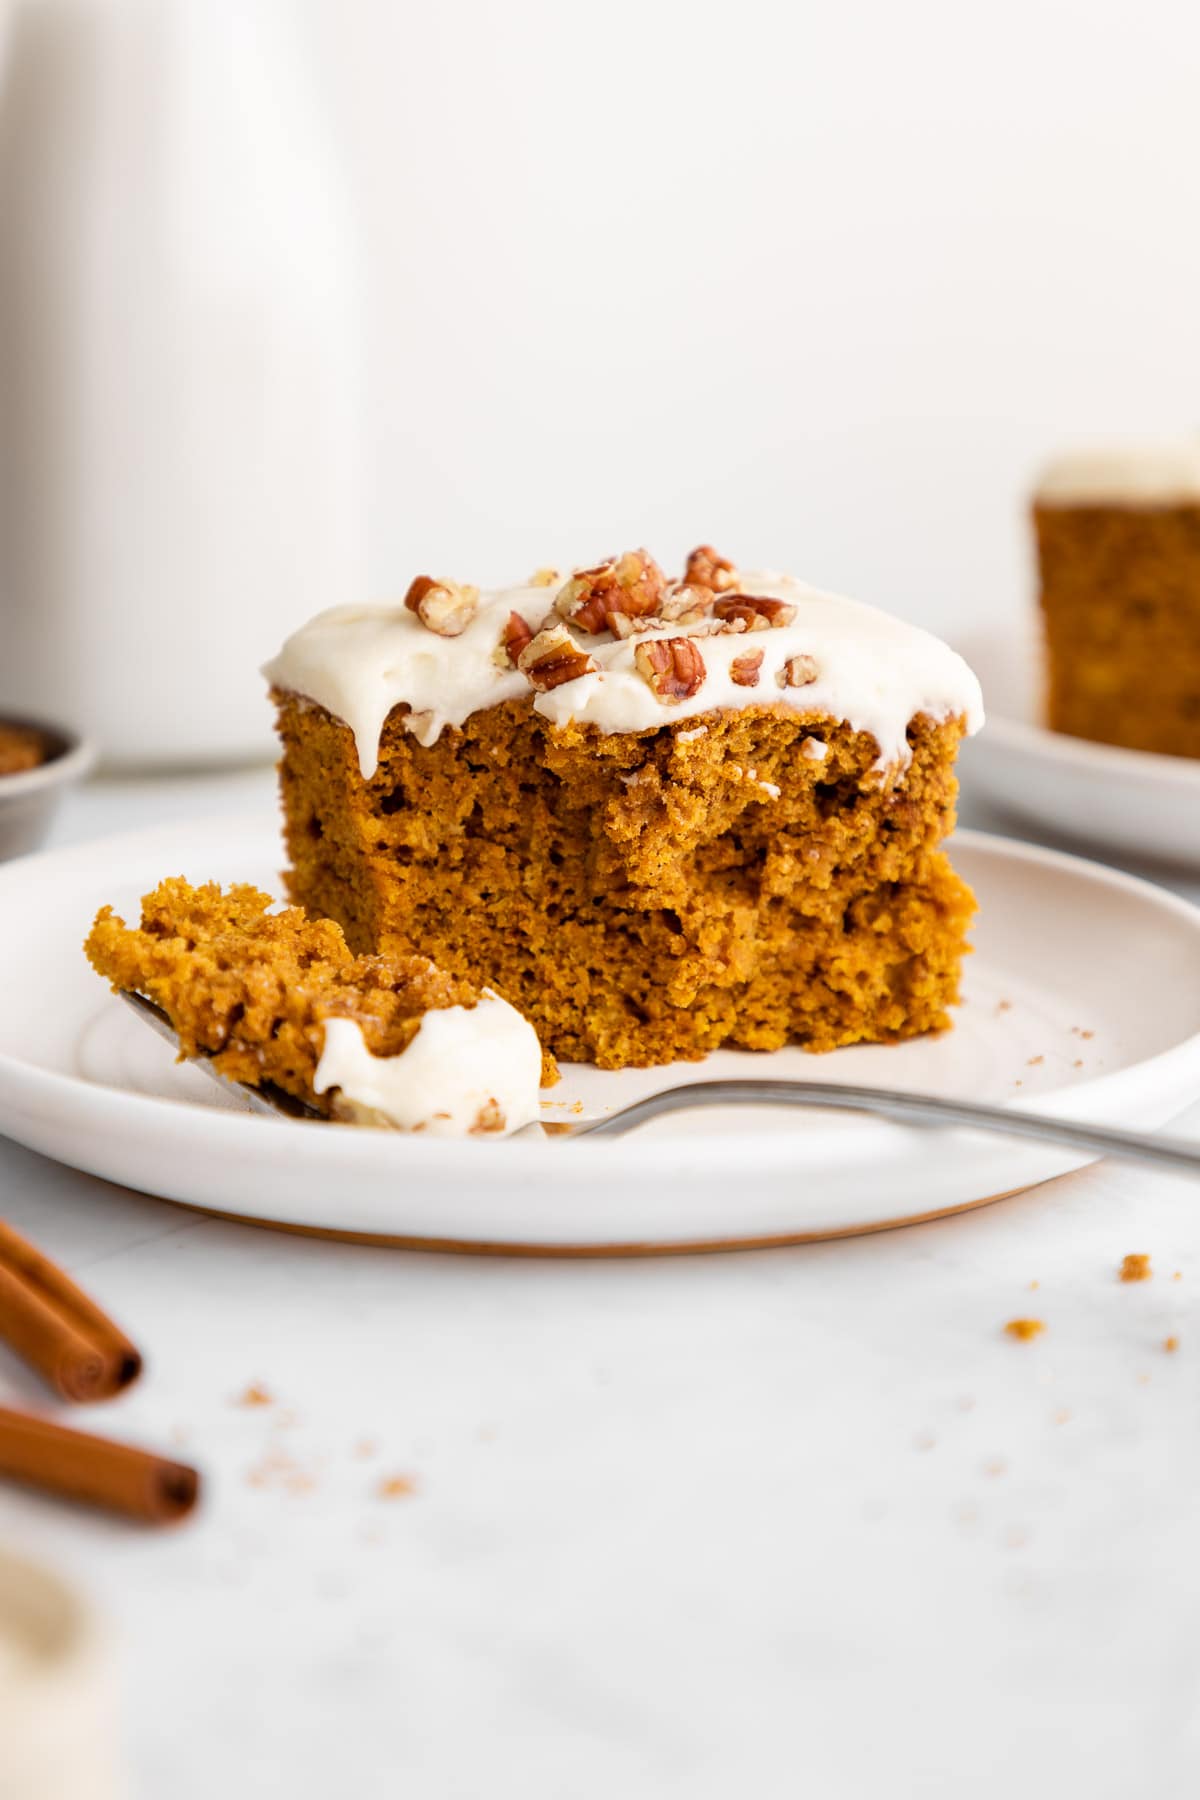 a slice of vegan pumpkin cake with vegan cream cheese frosting on a plate